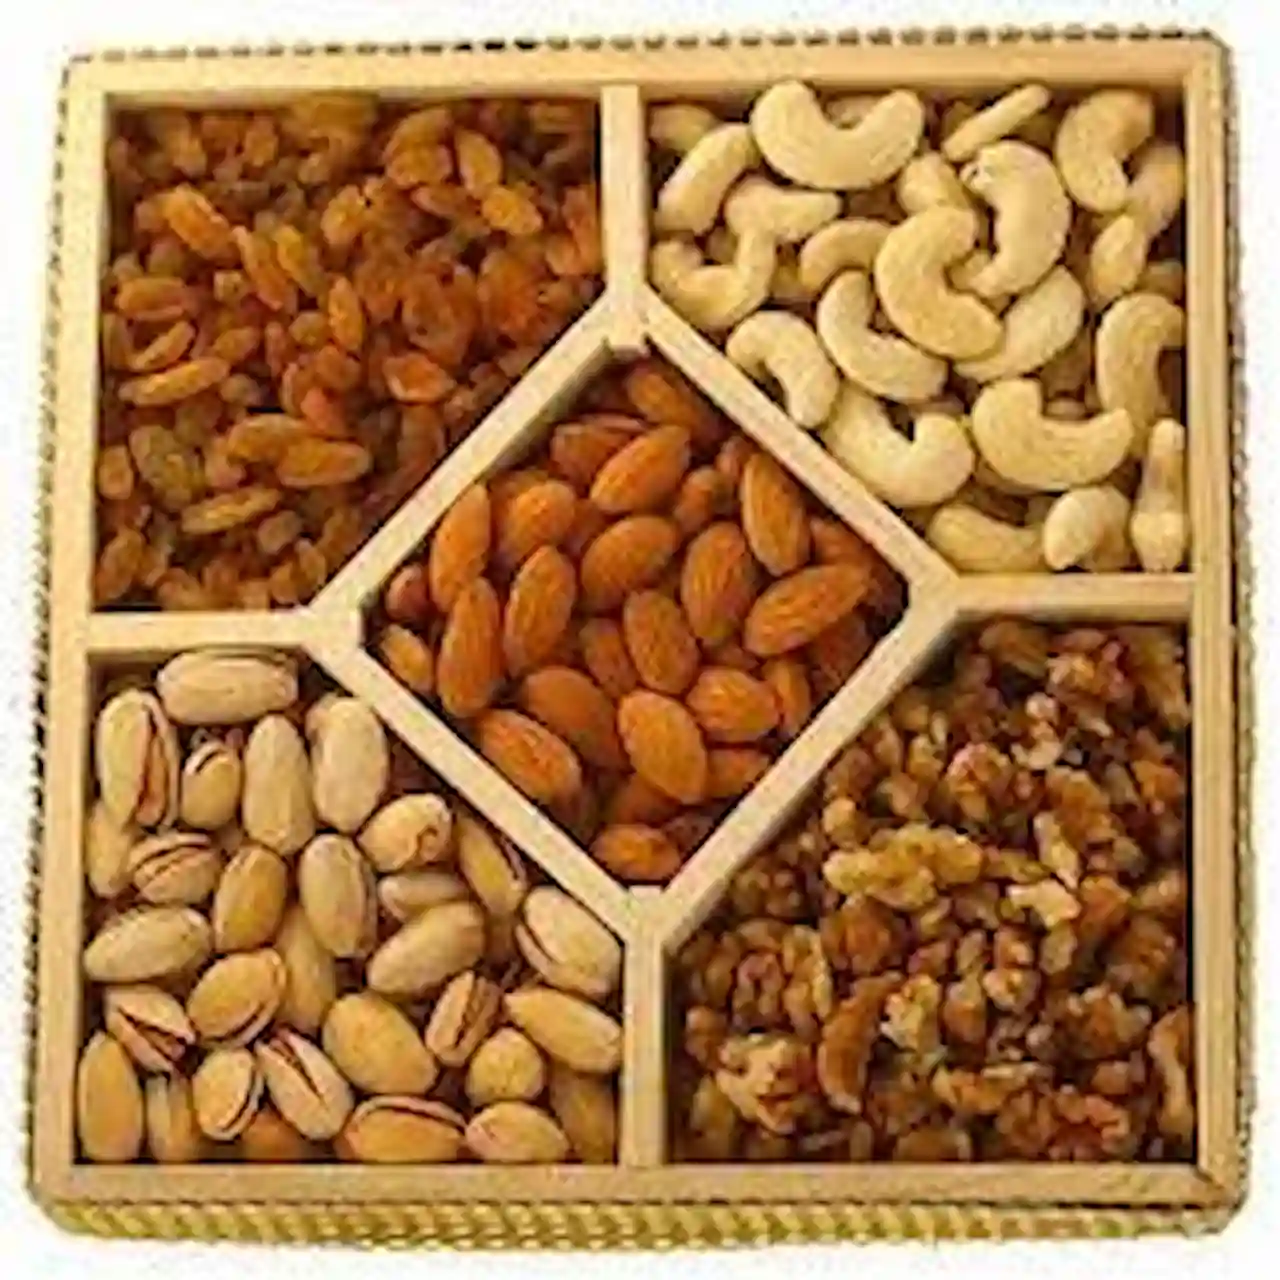 Disadvantages of Eating Too Much Dry Fruits